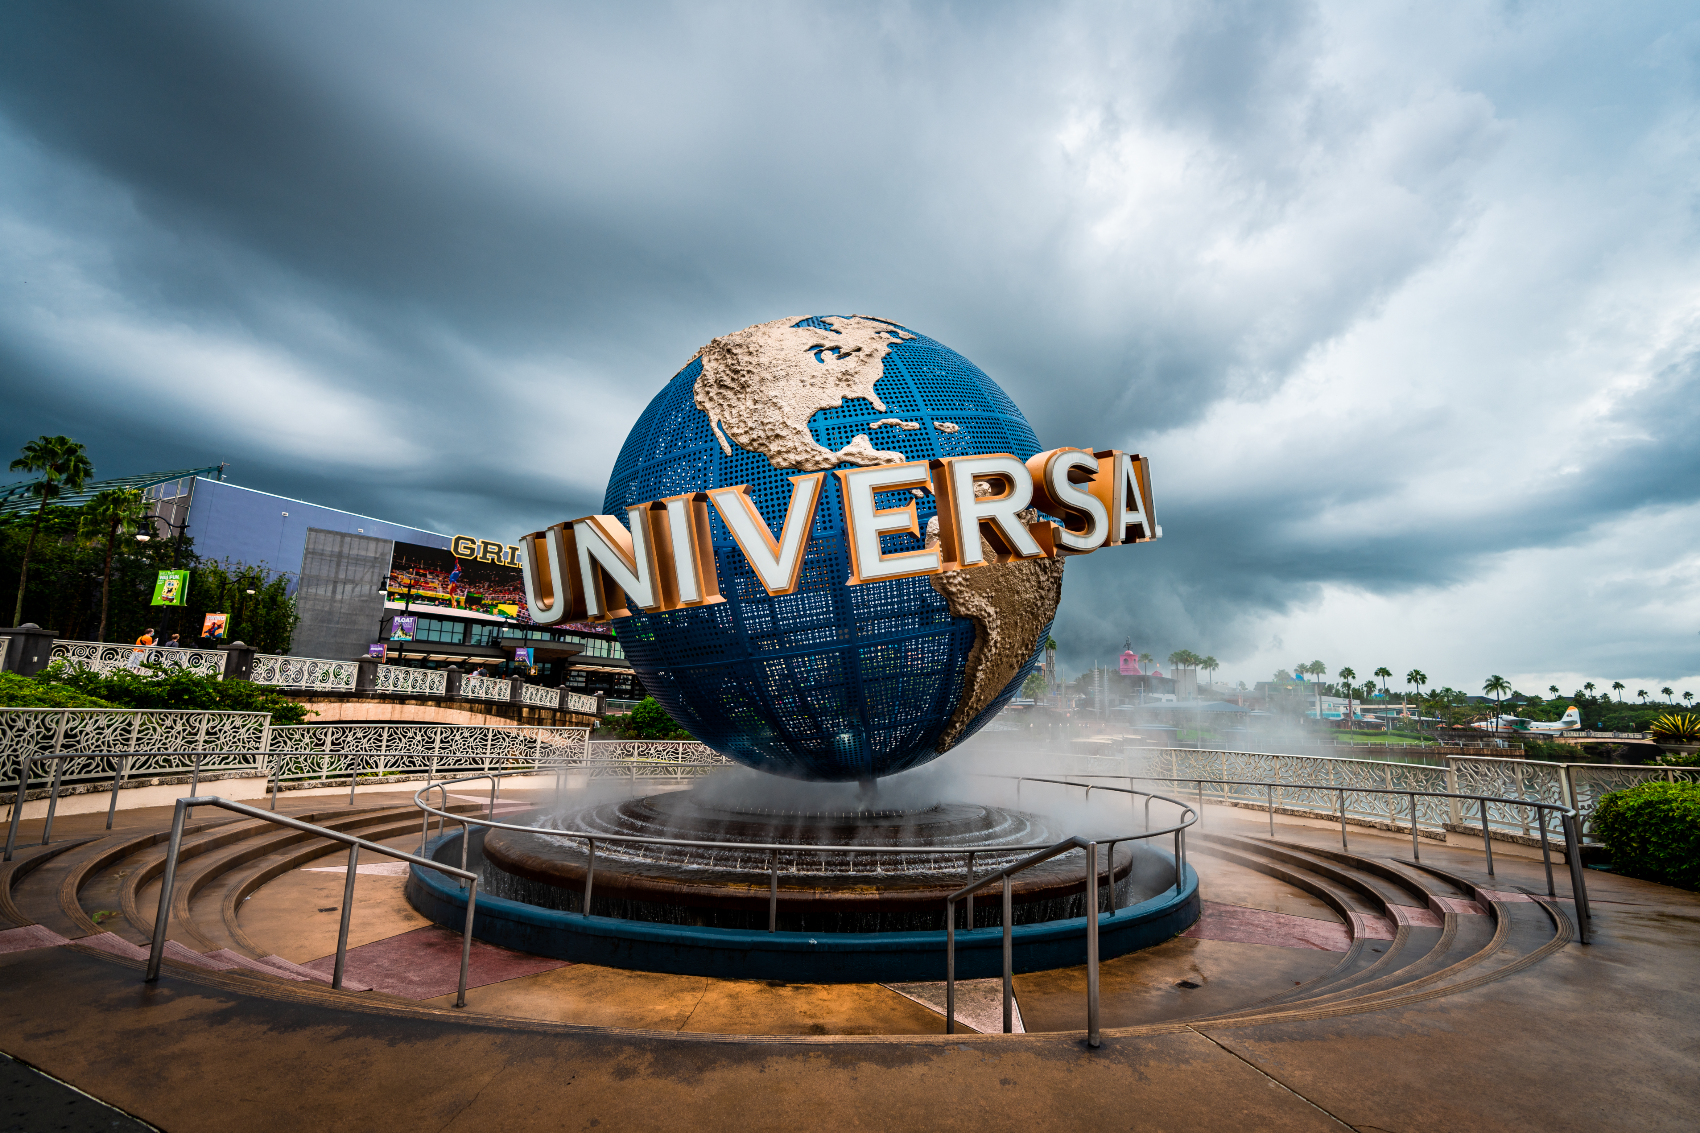 This is the best time to visit Universal Studios Orlando